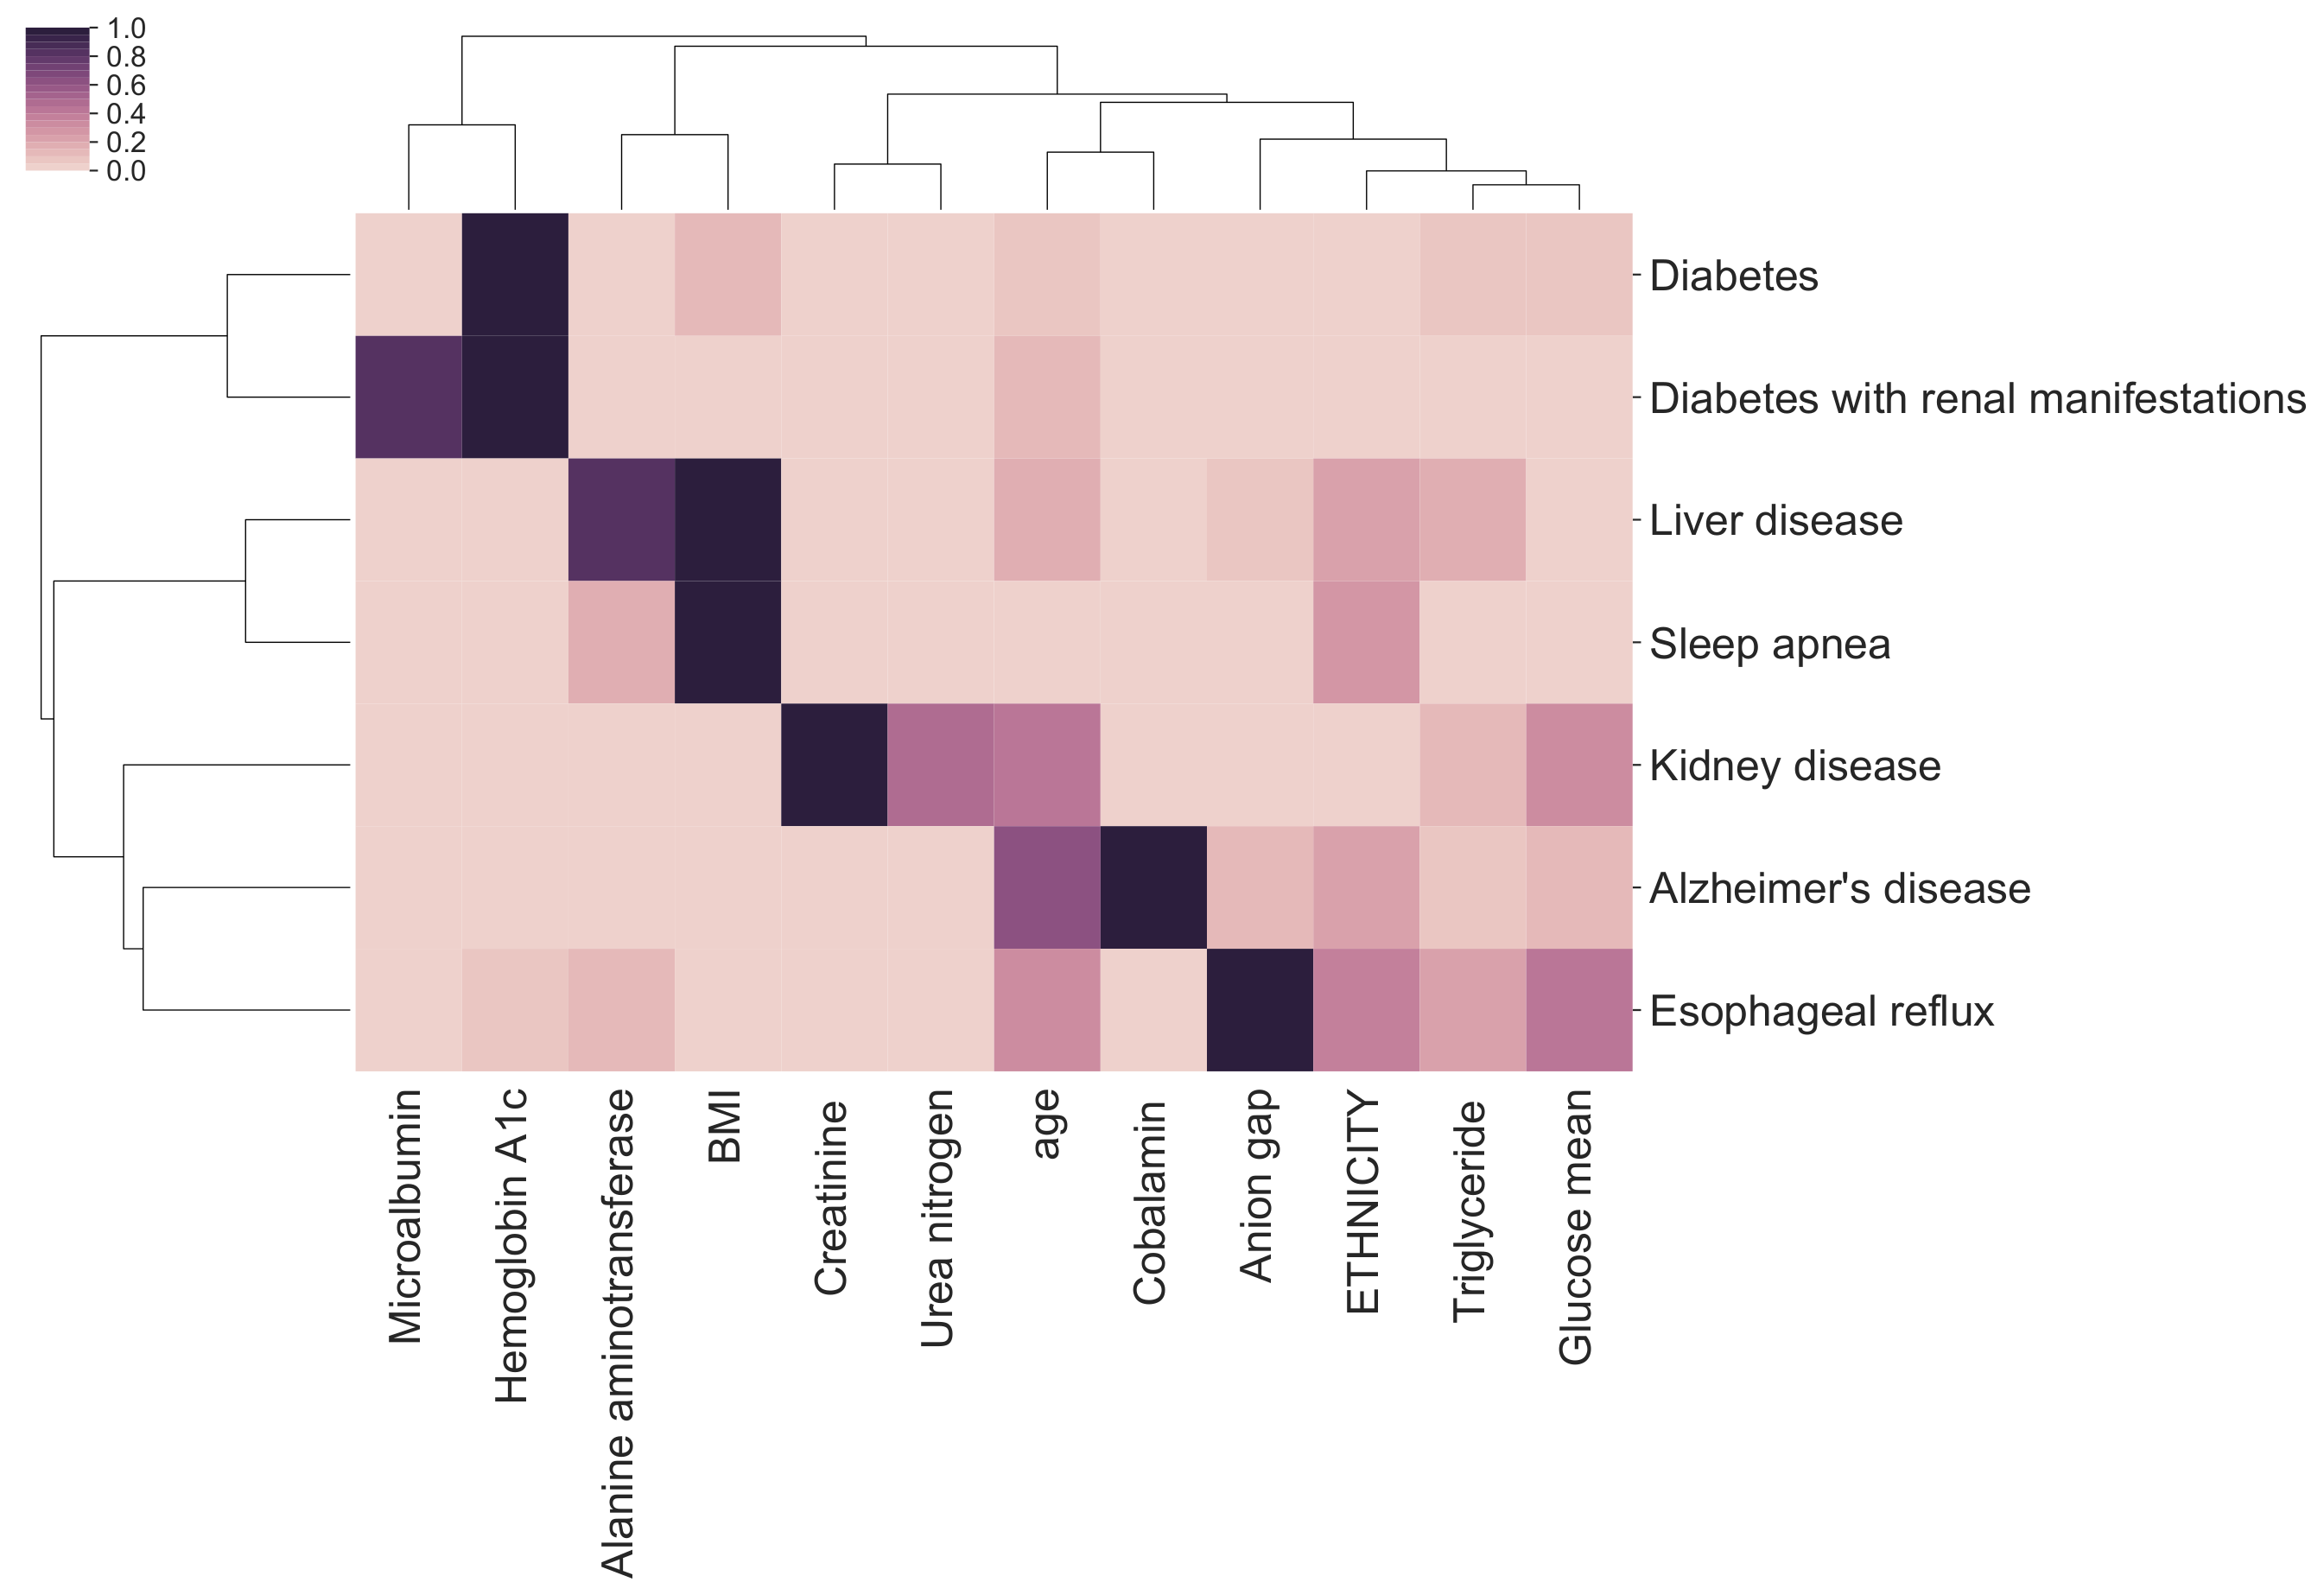 Feature importance bi-clustering across diseases and predictors.